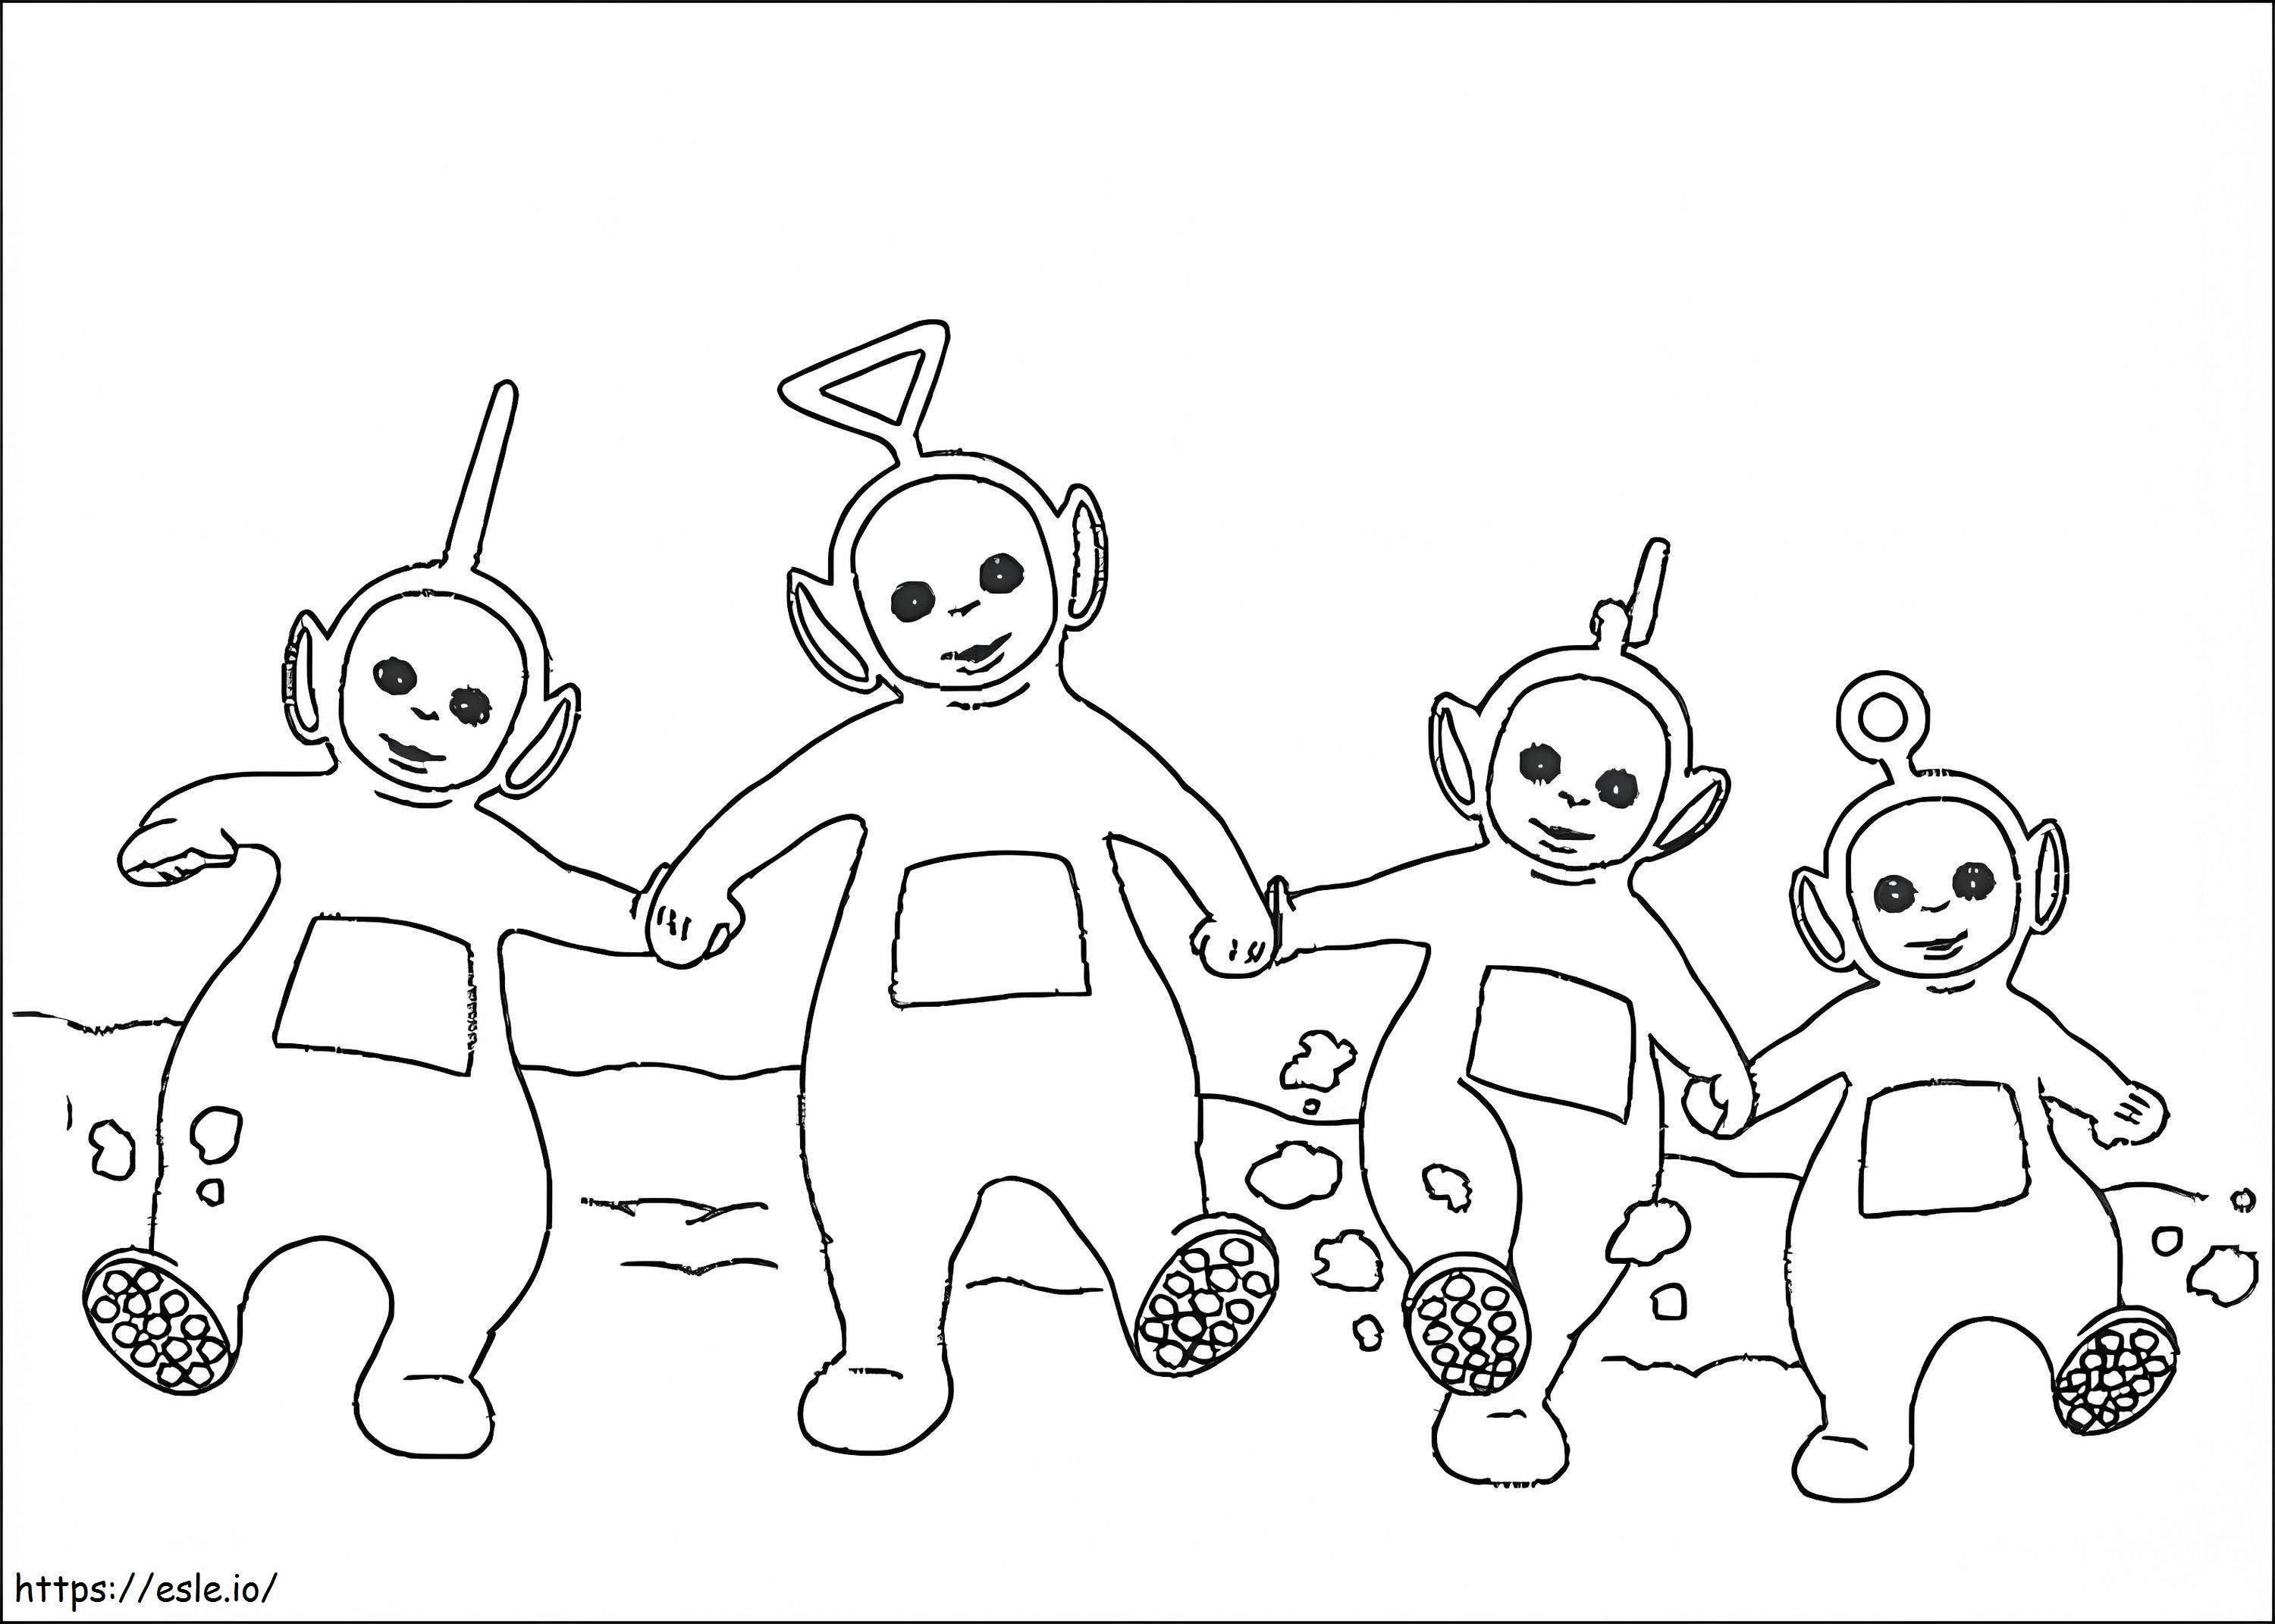 Teletubbies coloring page